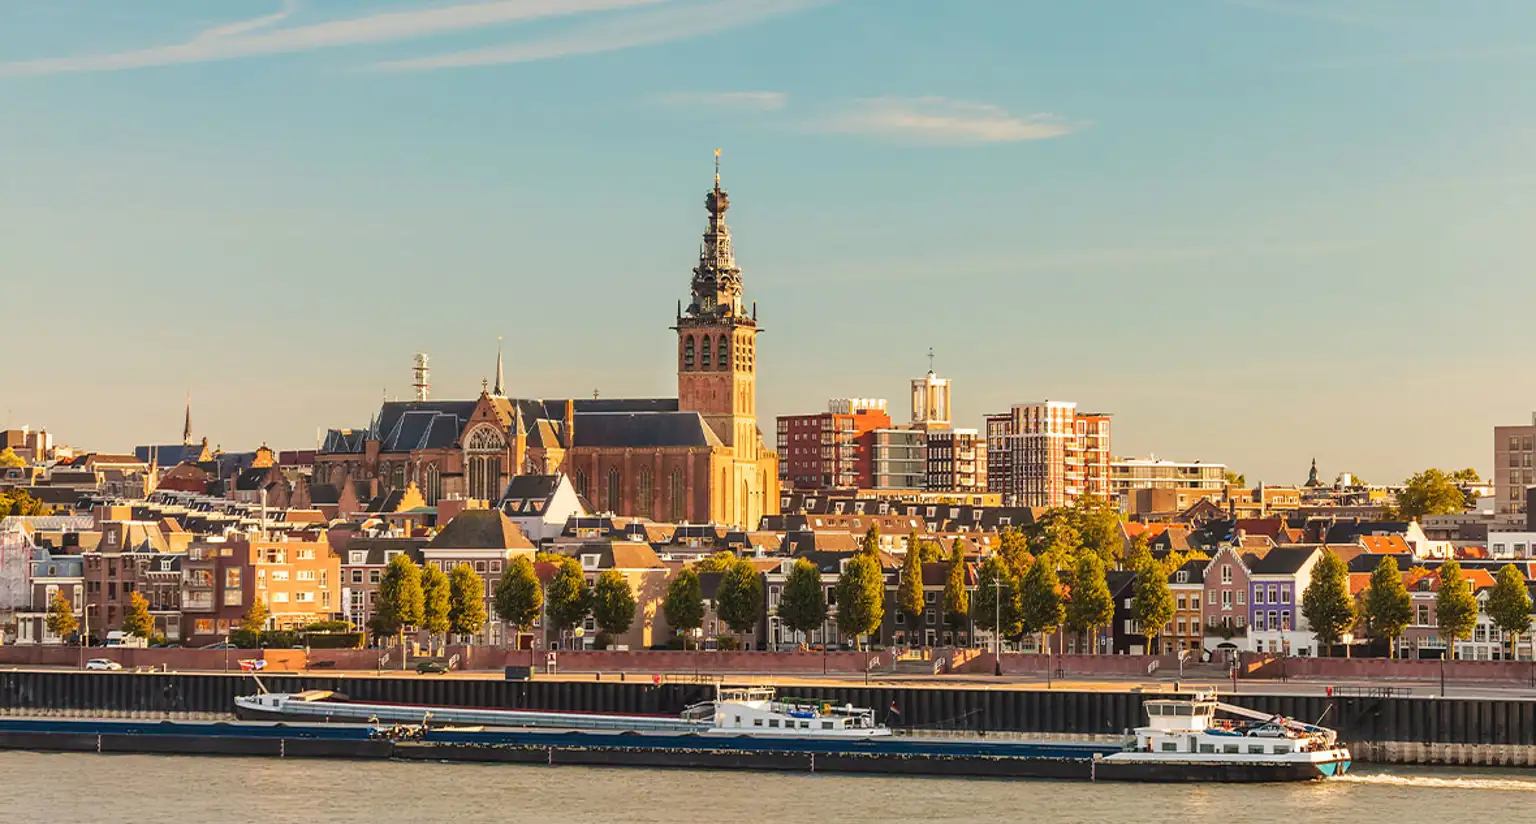 Things to see and do in Nijmegen